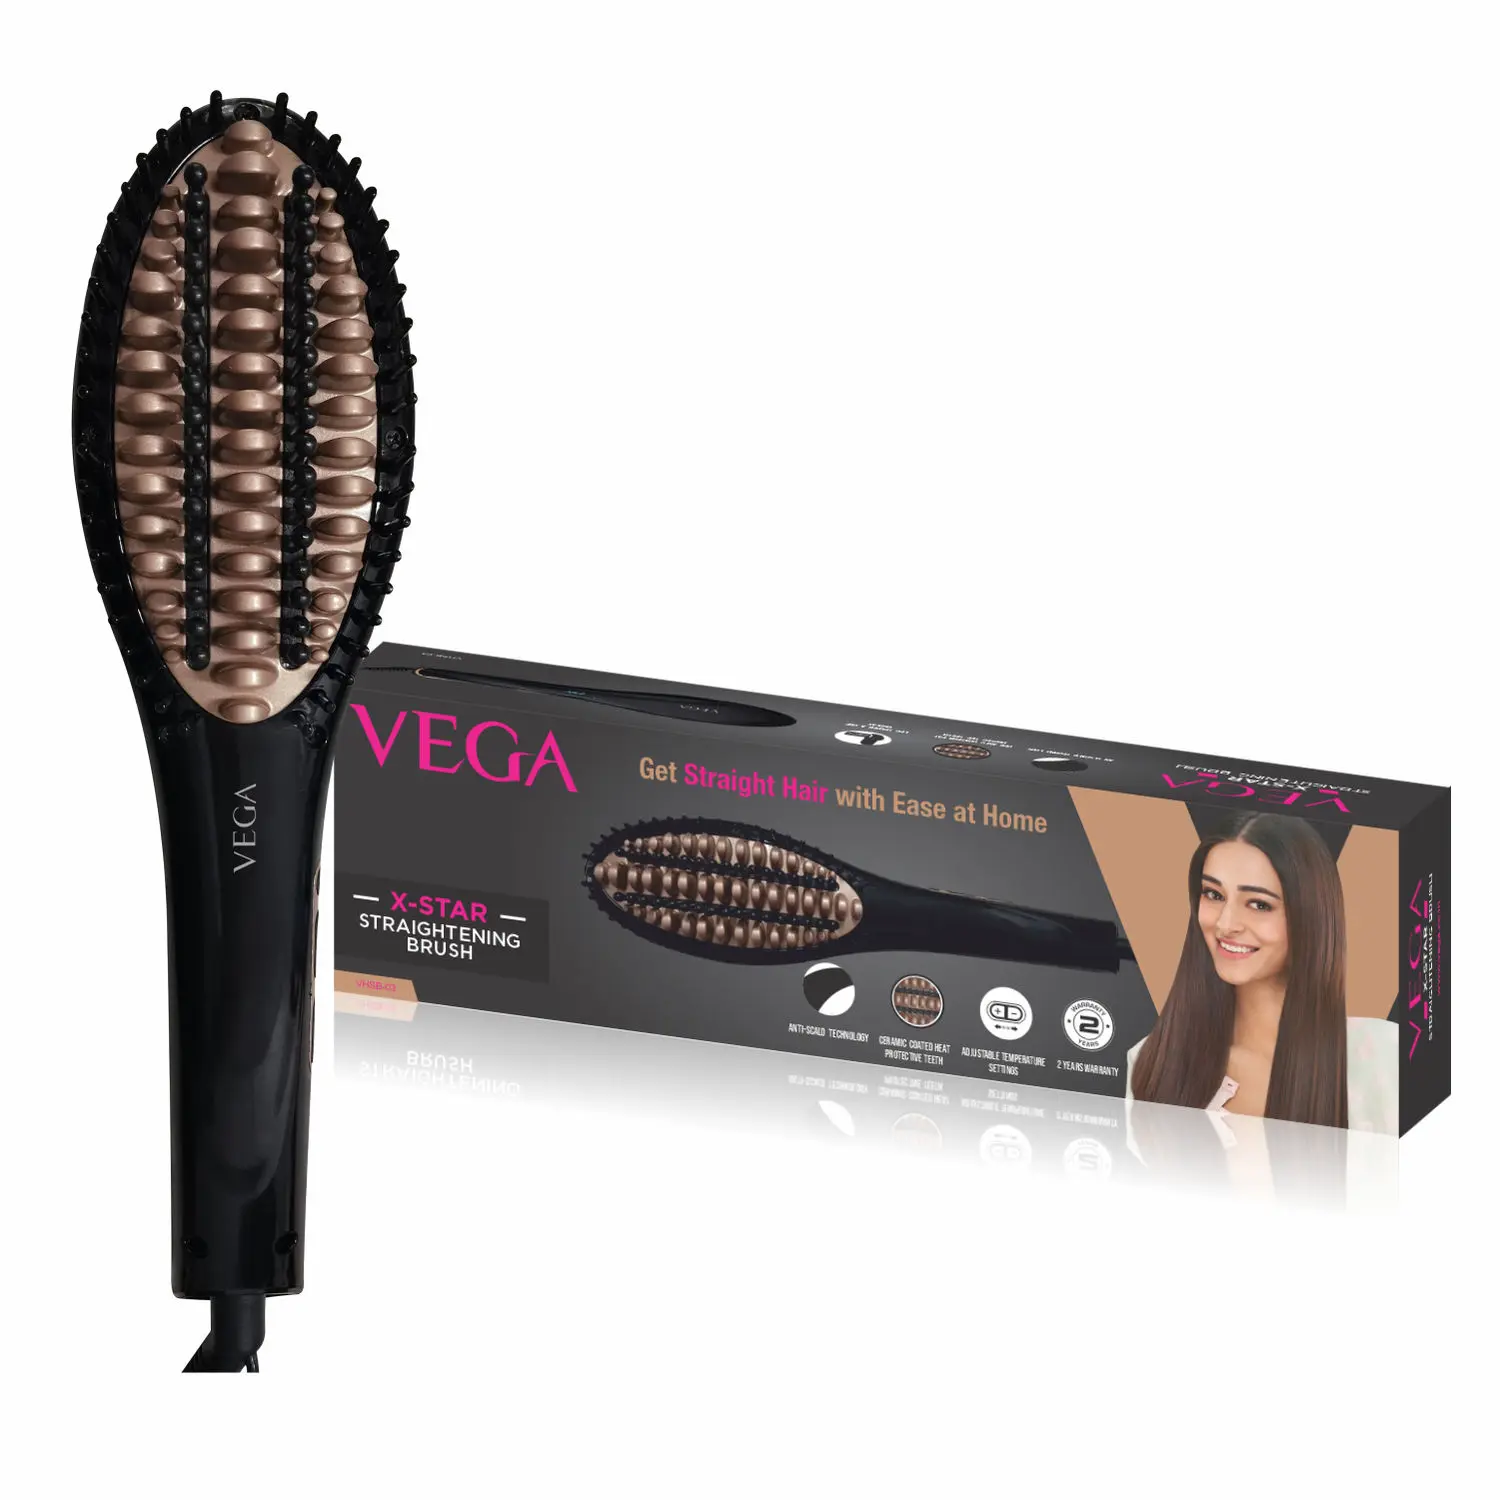 VEGA X-Star Hair Straightening Brush With Thermo Protect Technology & Adjustable Temperature Settings Hair Straightener, (VHSB-03)